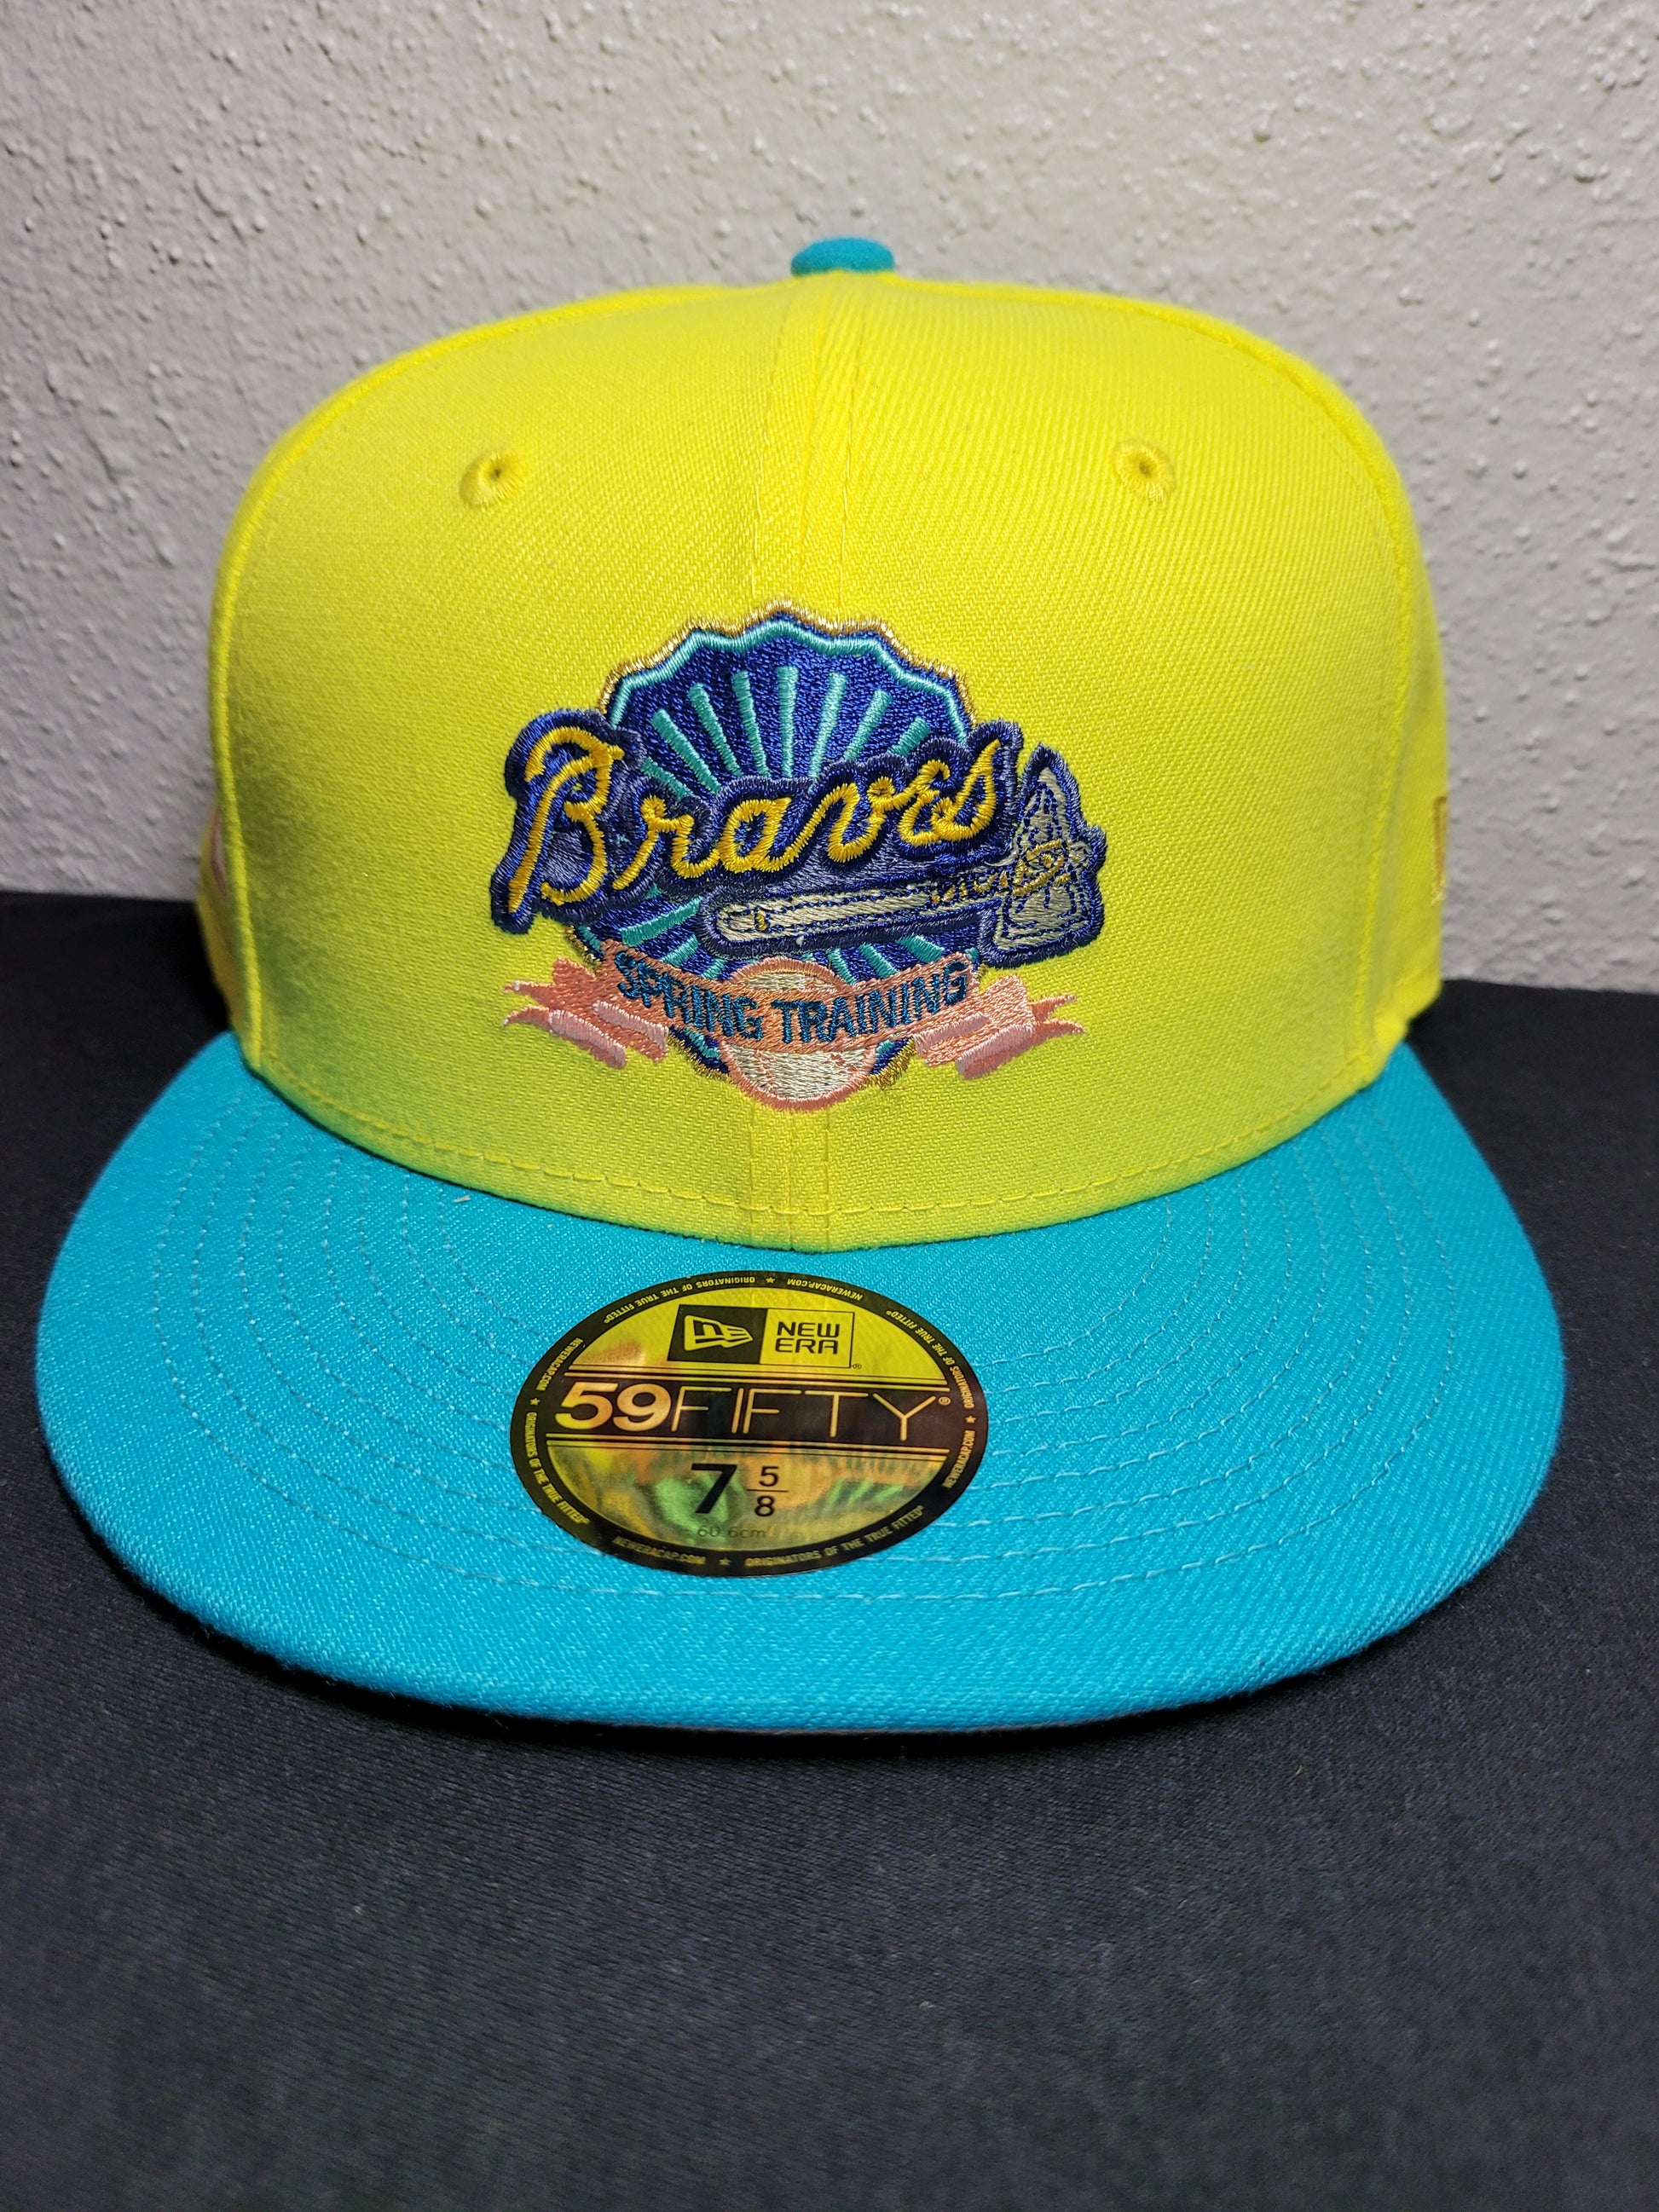 Atlanta Braves My Fitteds Exclusive New Era Hat – Fitted BLVD